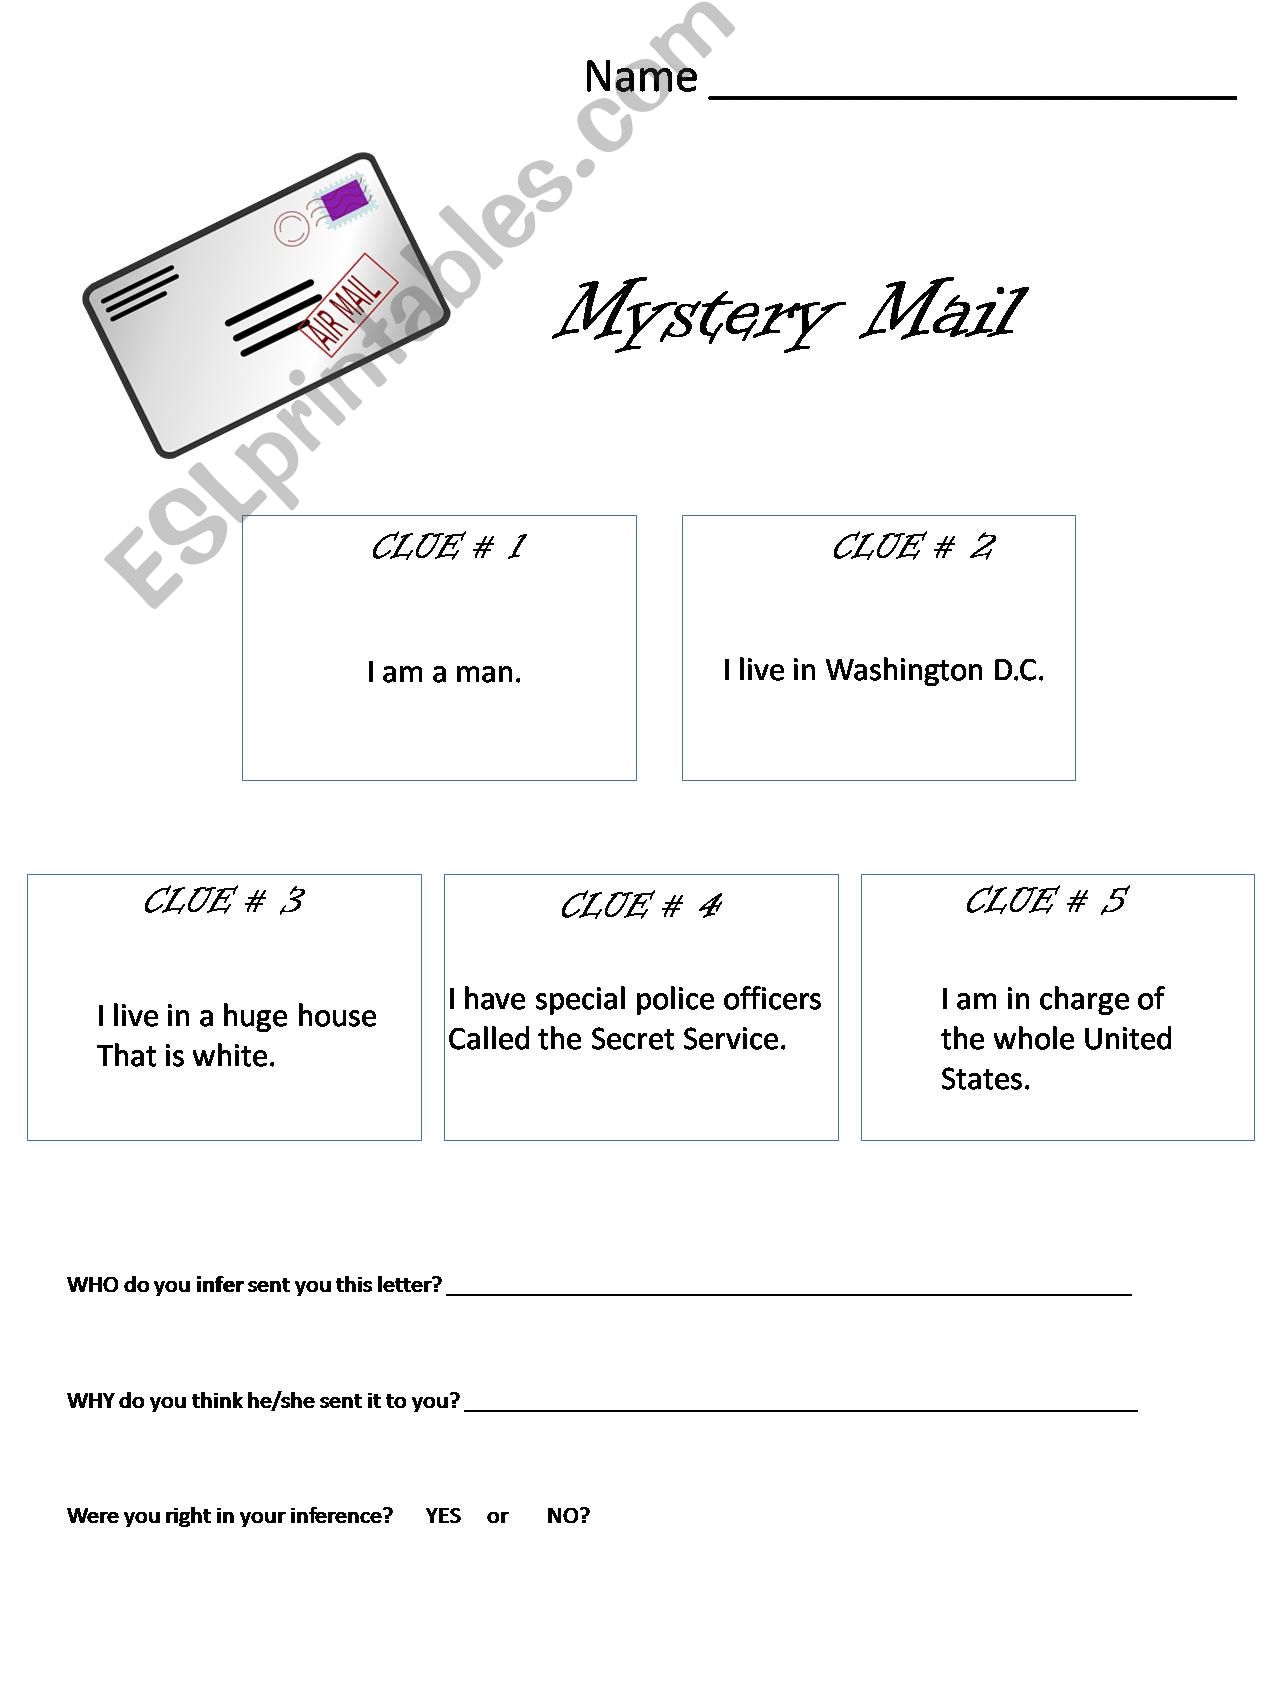 Mystery Mail 7 powerpoint